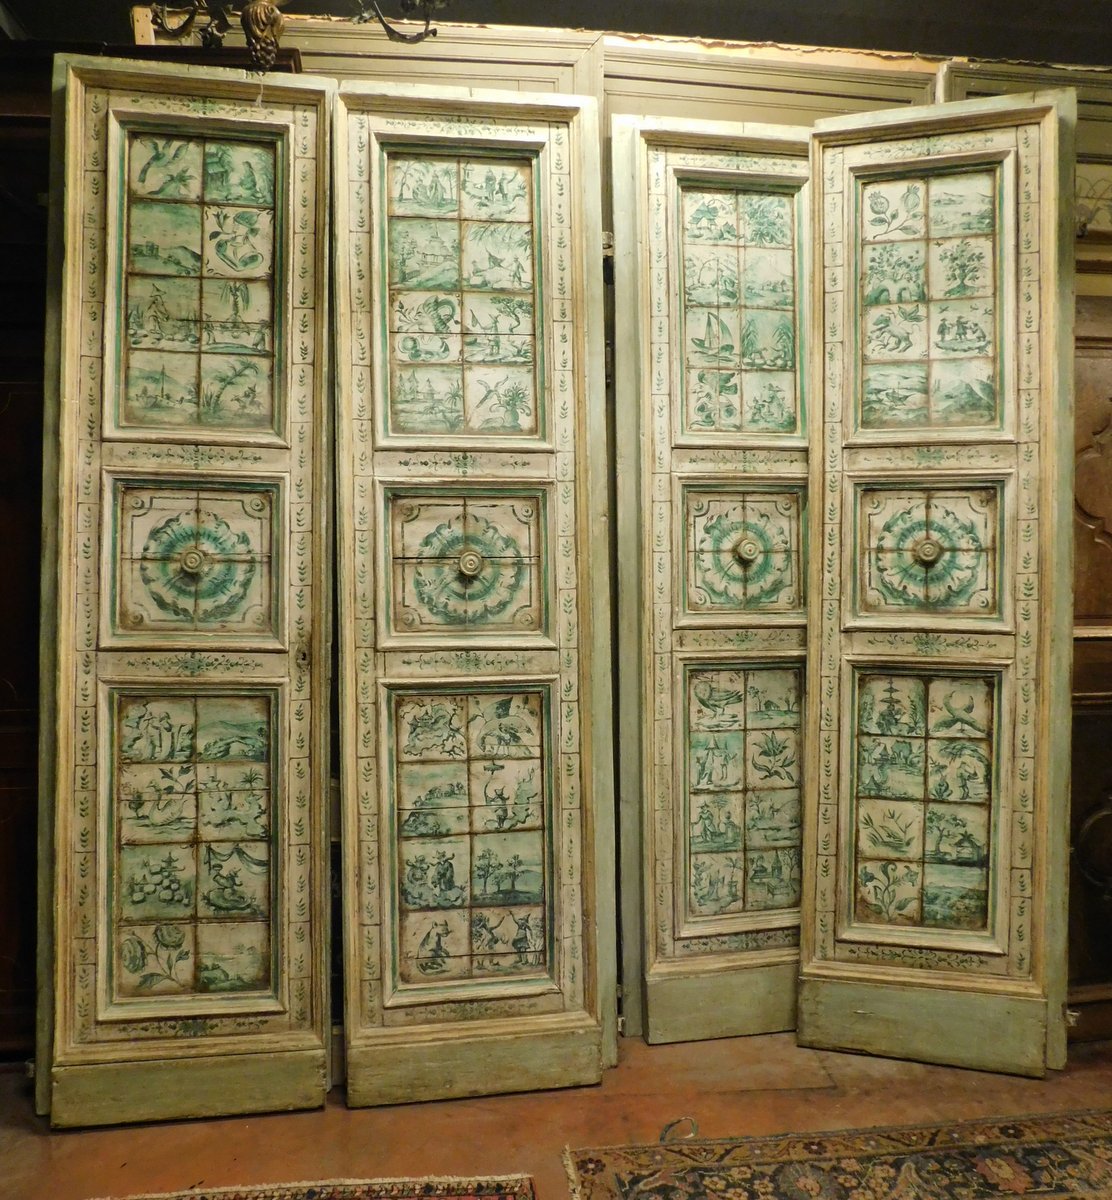 A pts718 - n. 5 pairs of doors with majolica paintings, cm l 148 x h 274